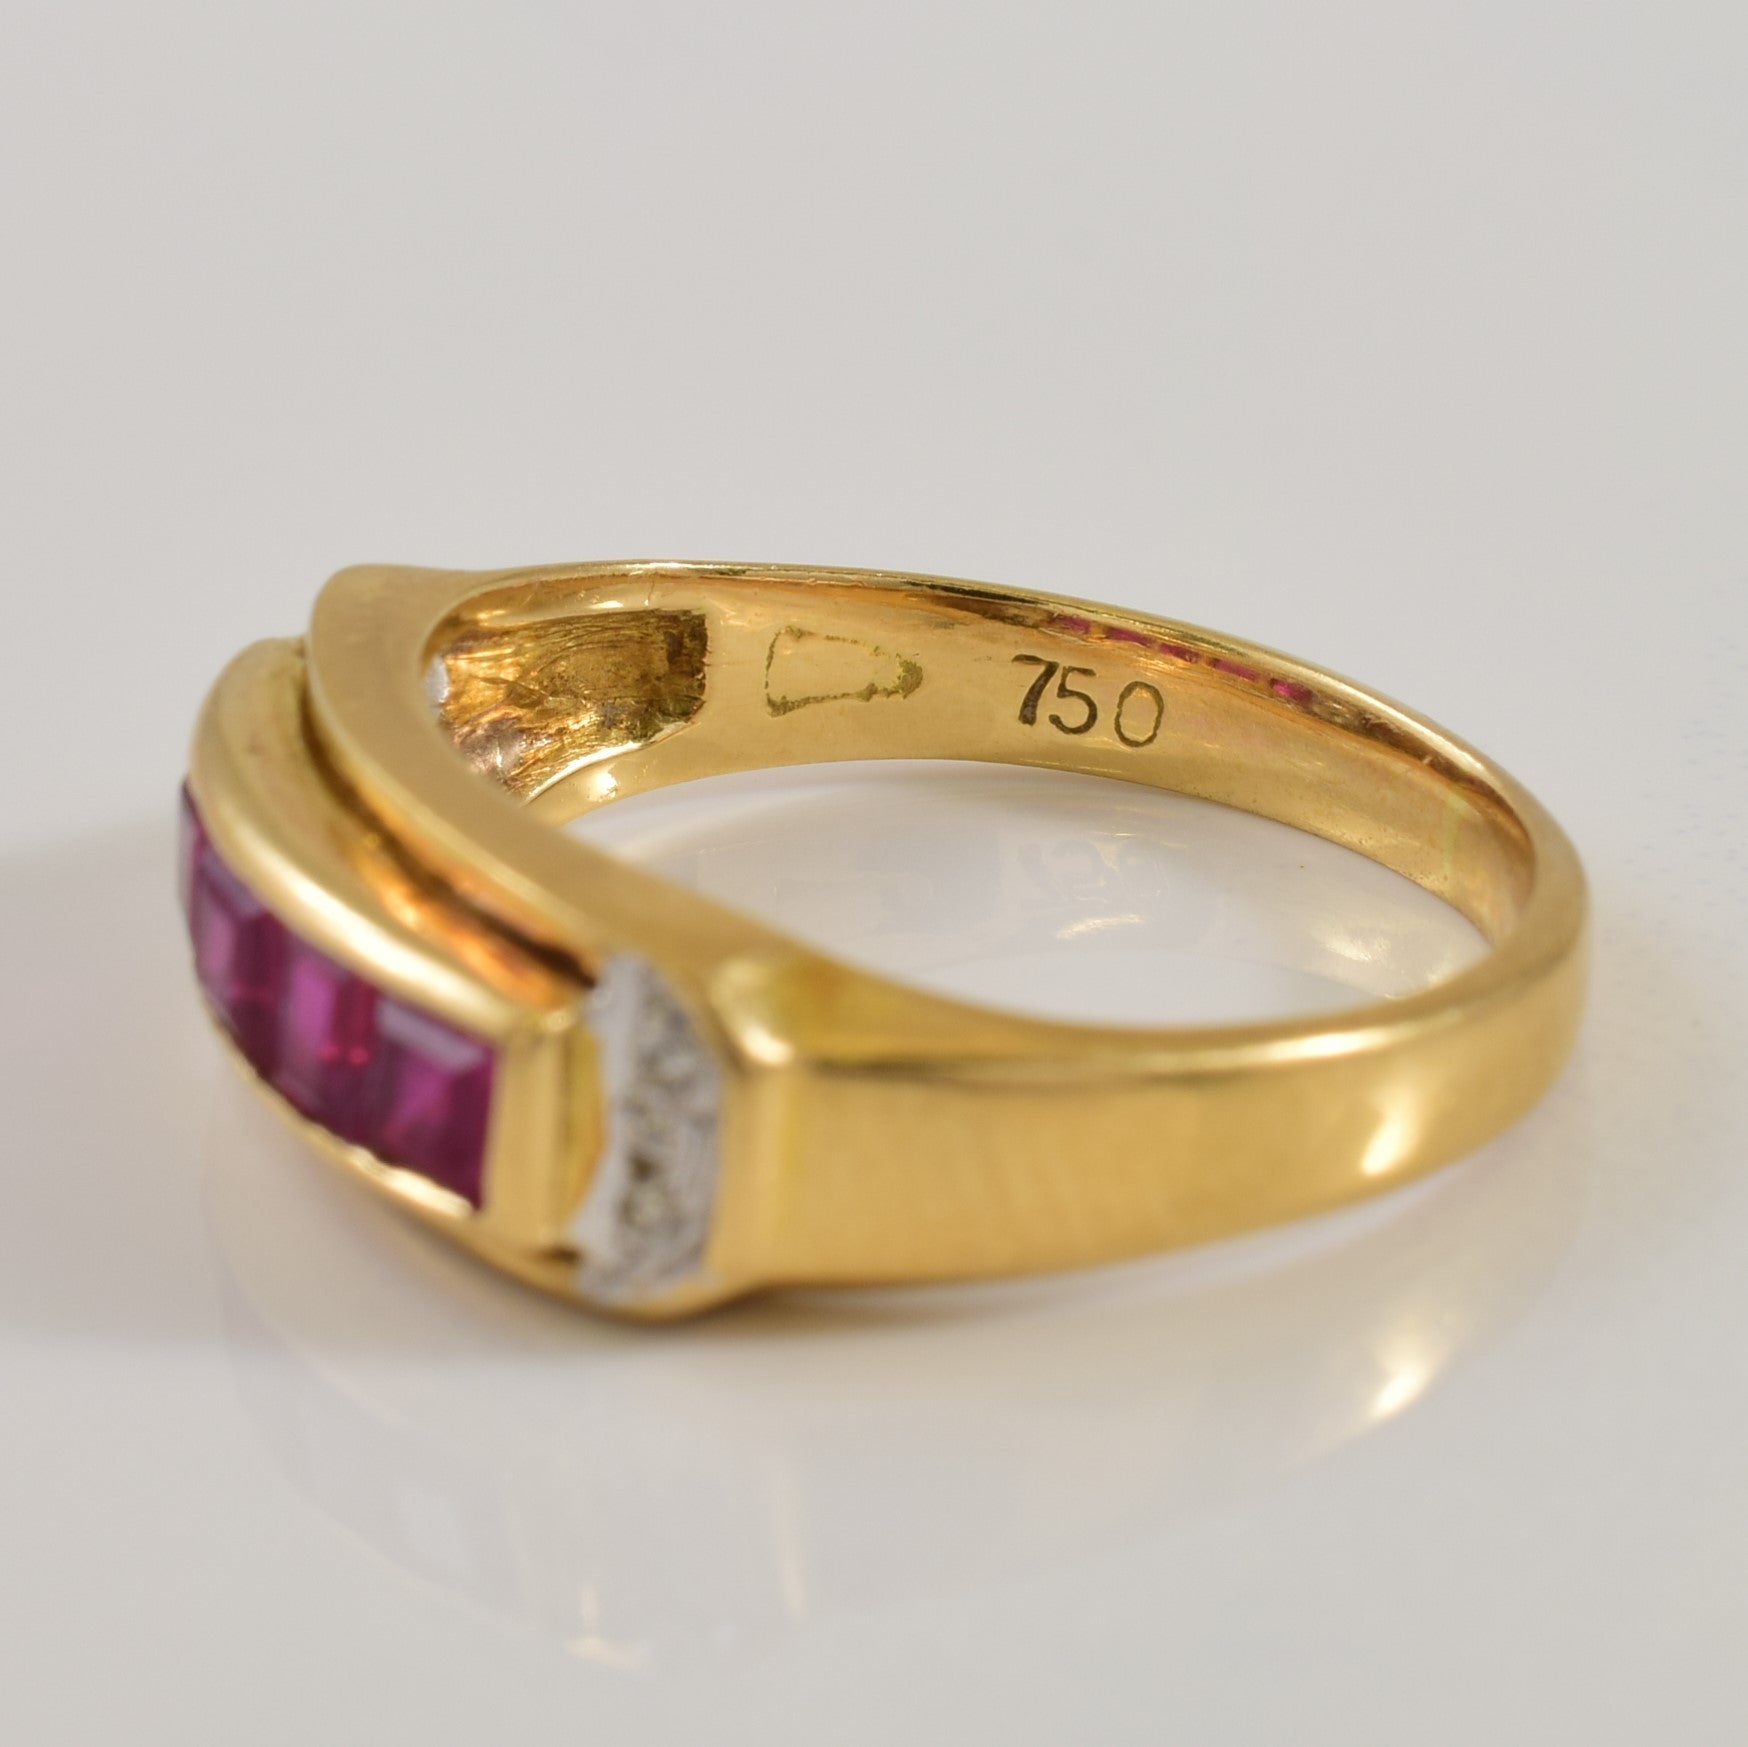 Channel Cut Ruby with Diamond Accents Ring | 0.75ctw, 0.02ctw | SZ 4.75 |